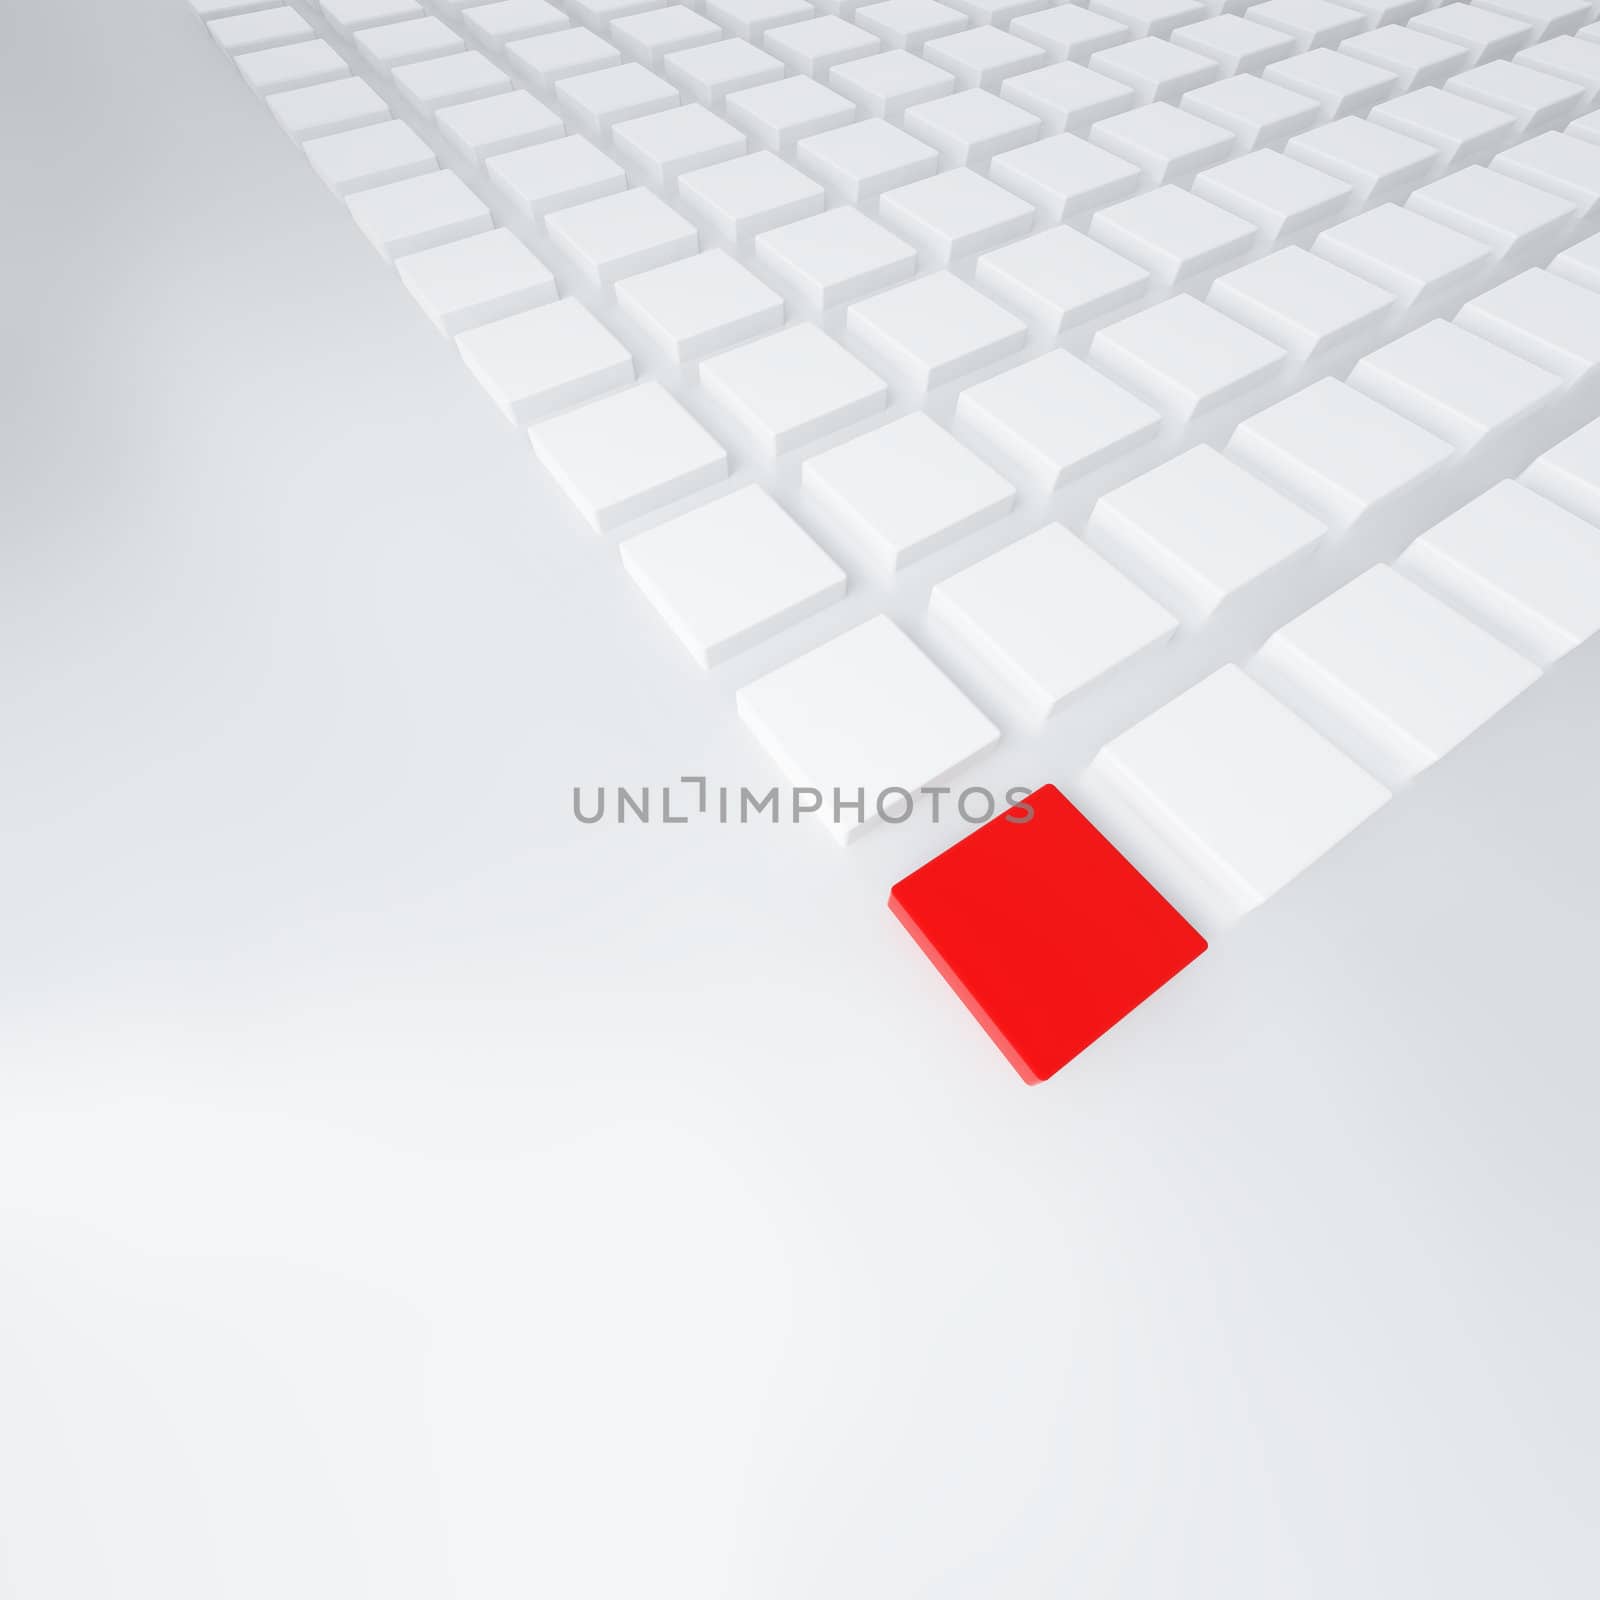 group of cubes of white and red color on light background